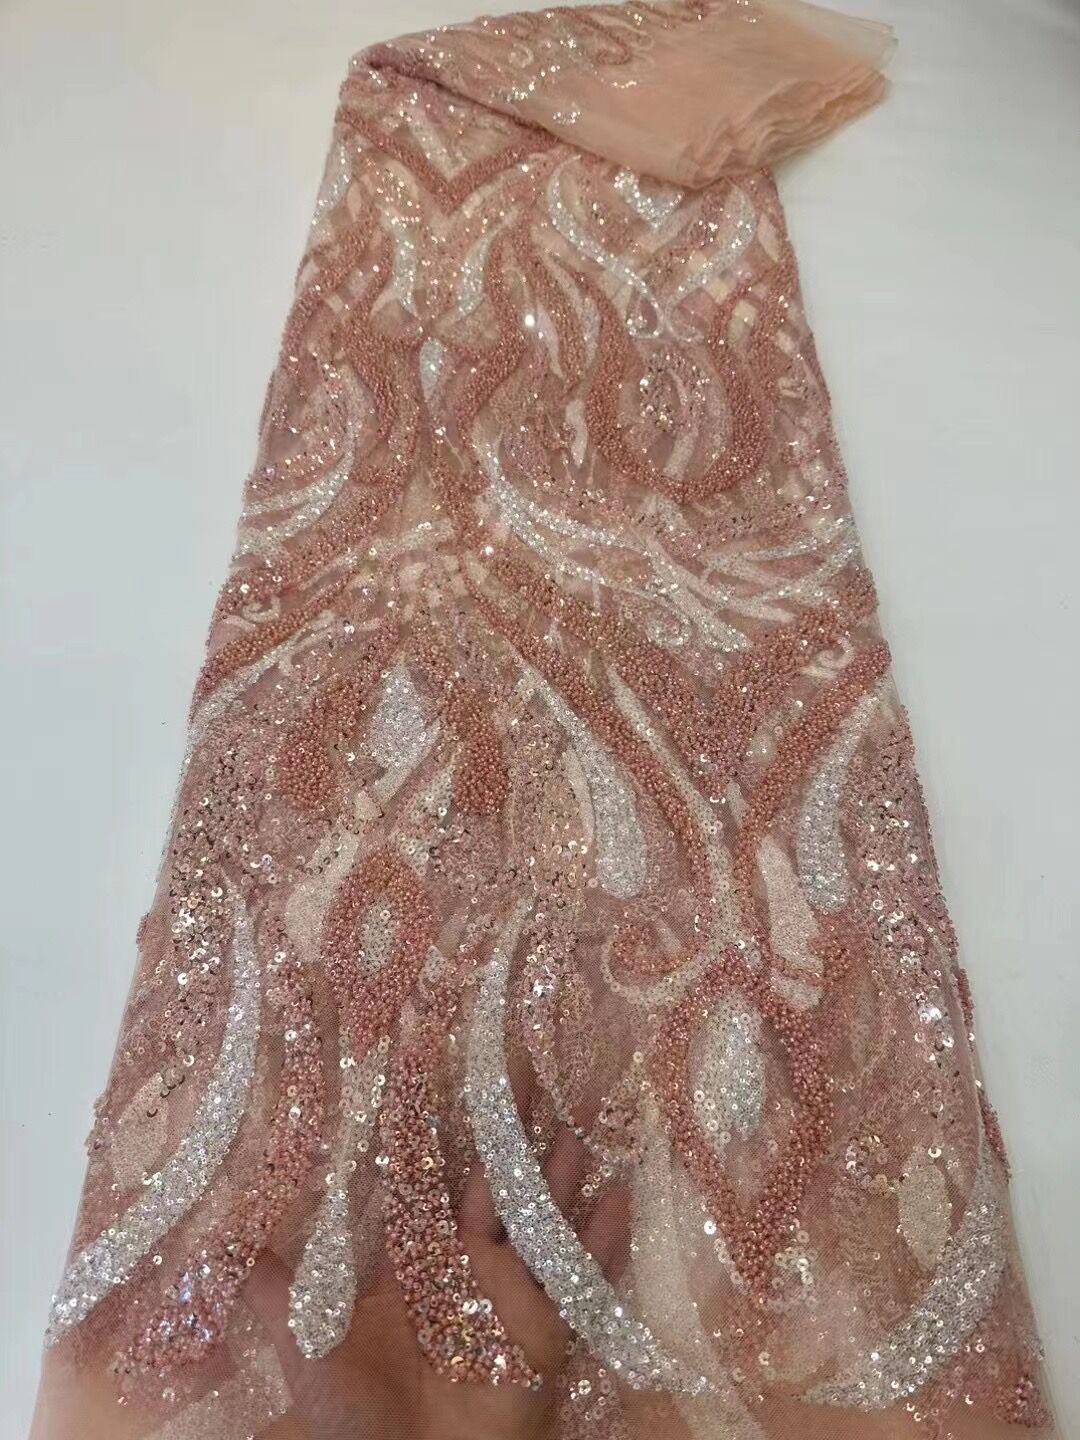 5 YARDS / 8 COLORS / Clarette Sequin Beaded Embroidered  Mesh Sparkly Lace Bridal Wedding Party Dress Fabric